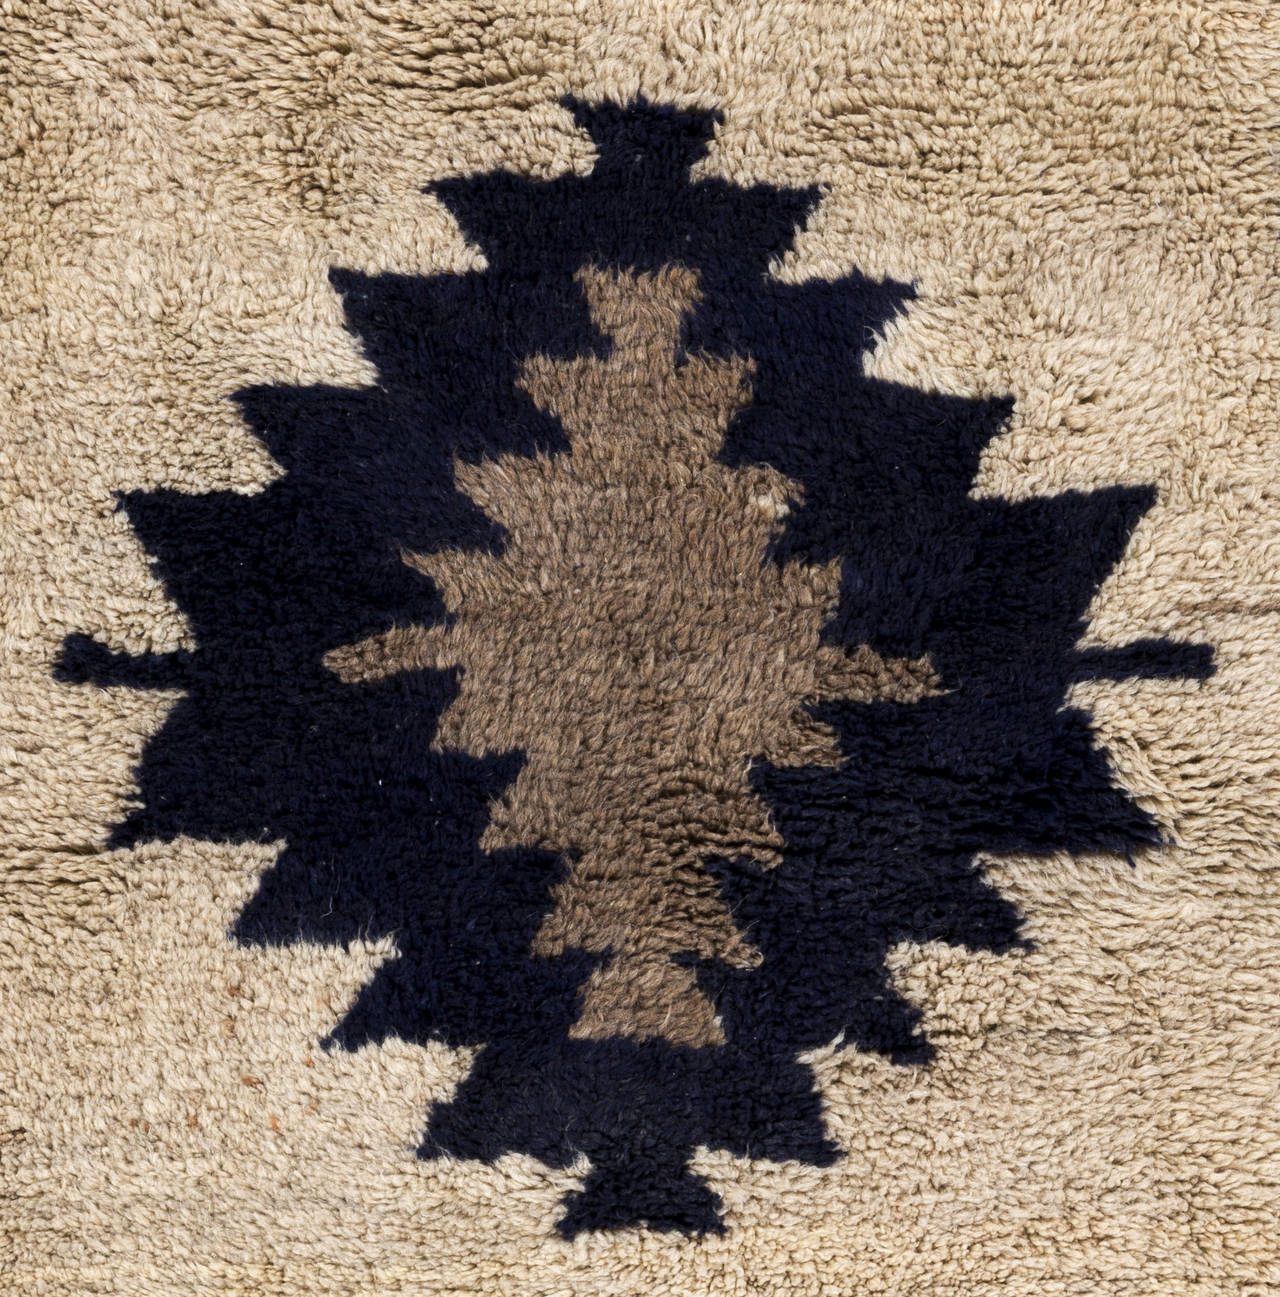 A unique vintage "Tulu" (rug with long pile) rug from Konya in Central Anatolia, Turkey.

These somewhat primitive and charming small rugs with long lustrous wool pile were produced for daily use by the nomads in Central Anatolia, until